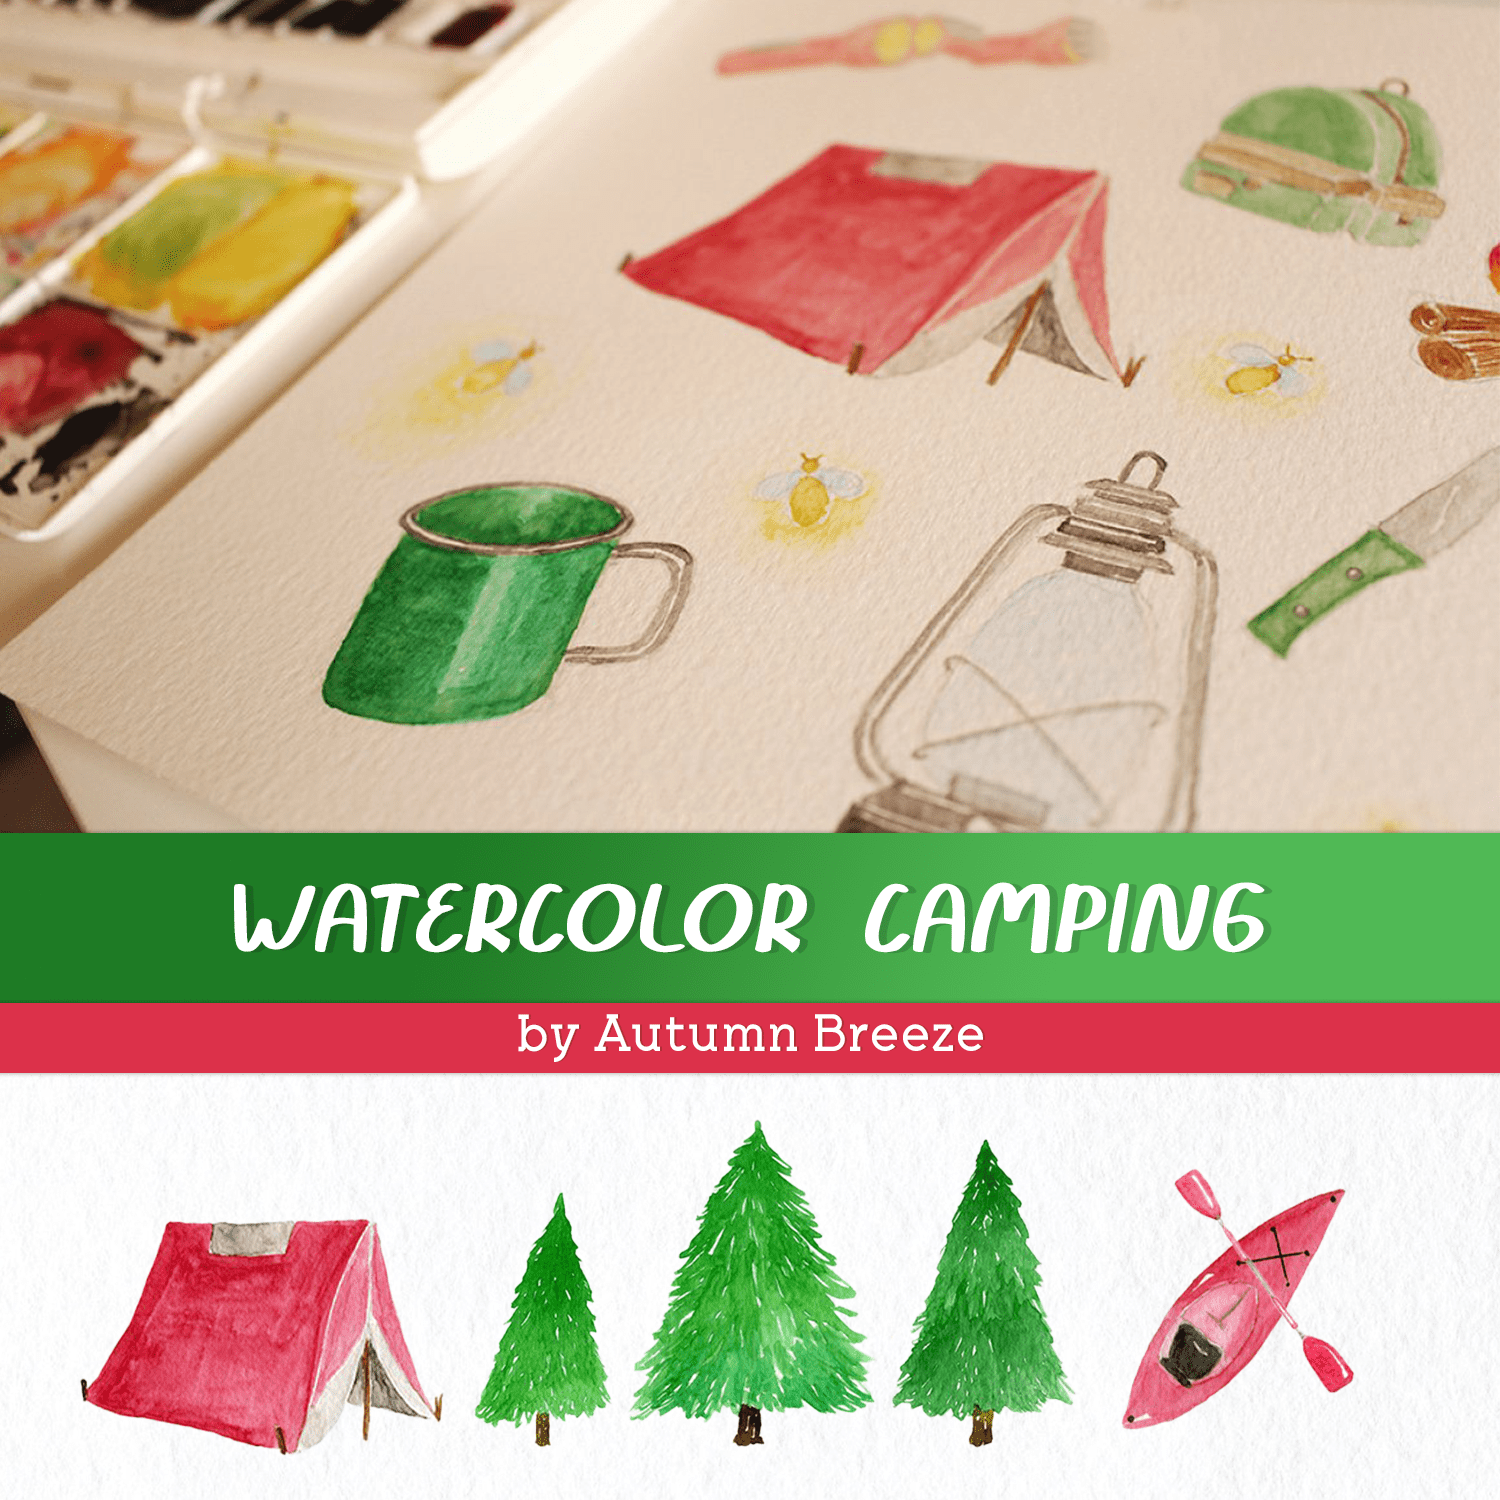 watercolor camping cover.